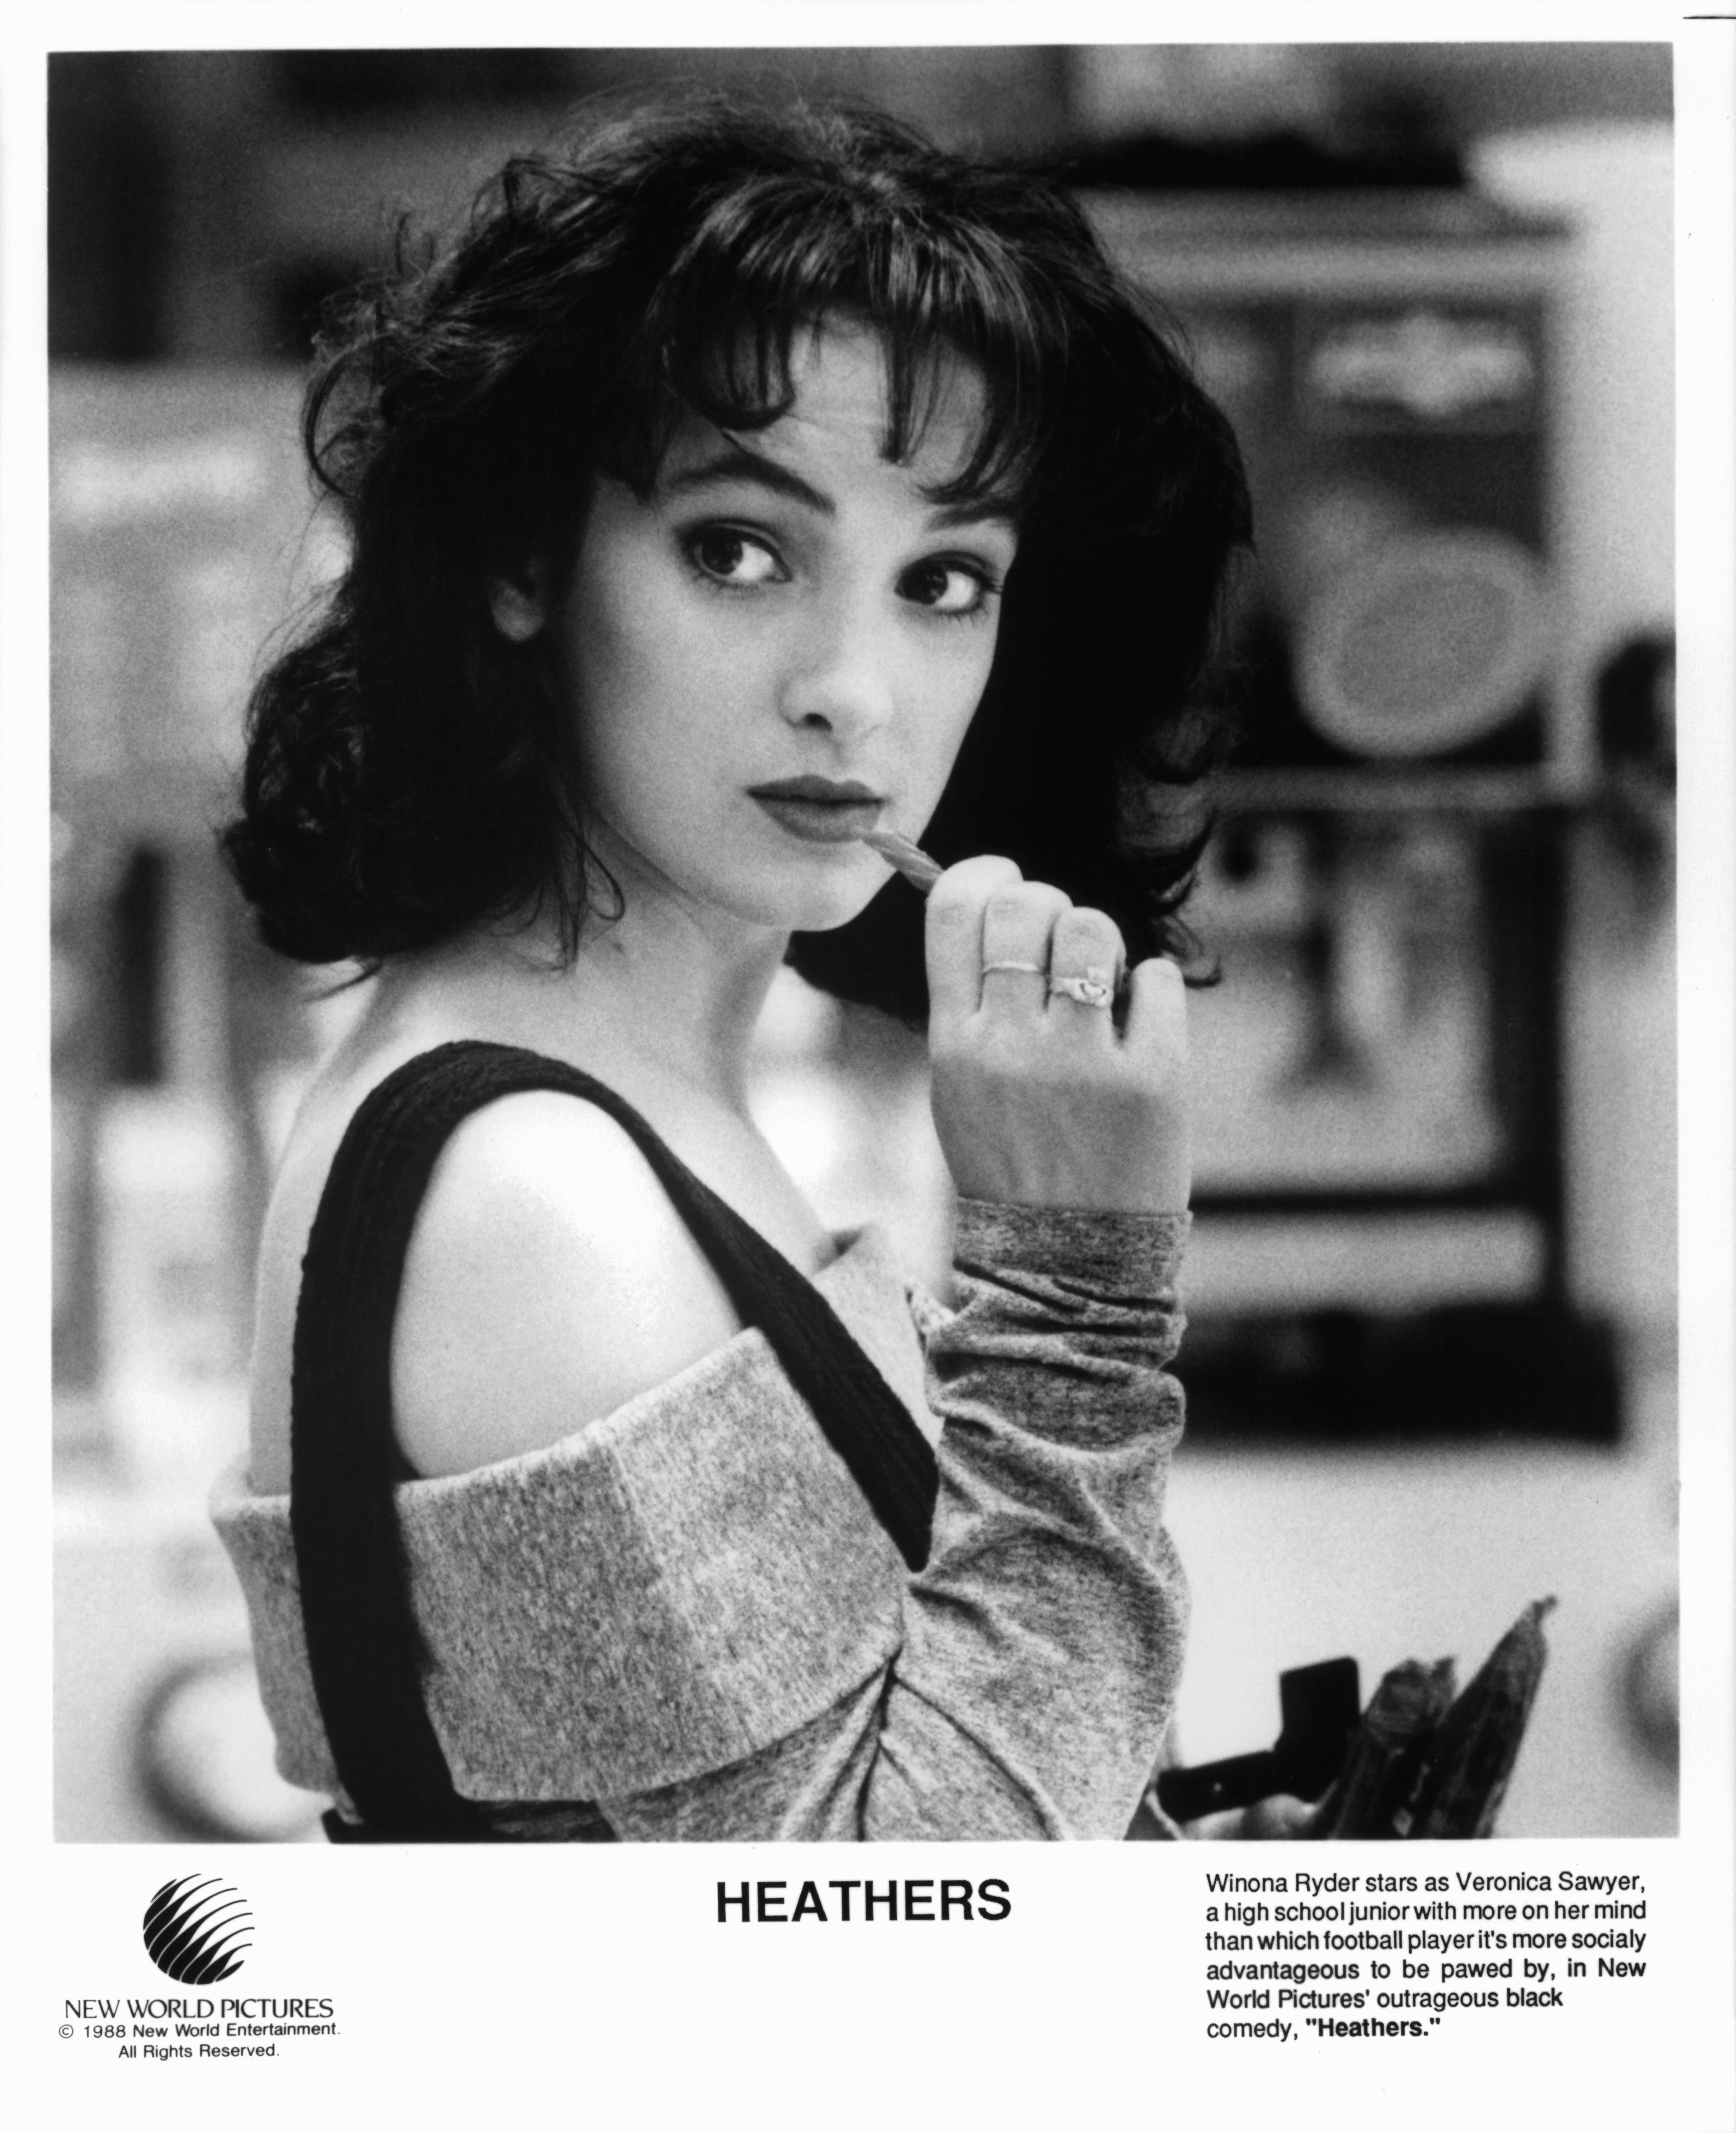 Winona Ryder is about to chew on a candy in a scene from the film "Heathers" in 1988. | Source: Getty Images